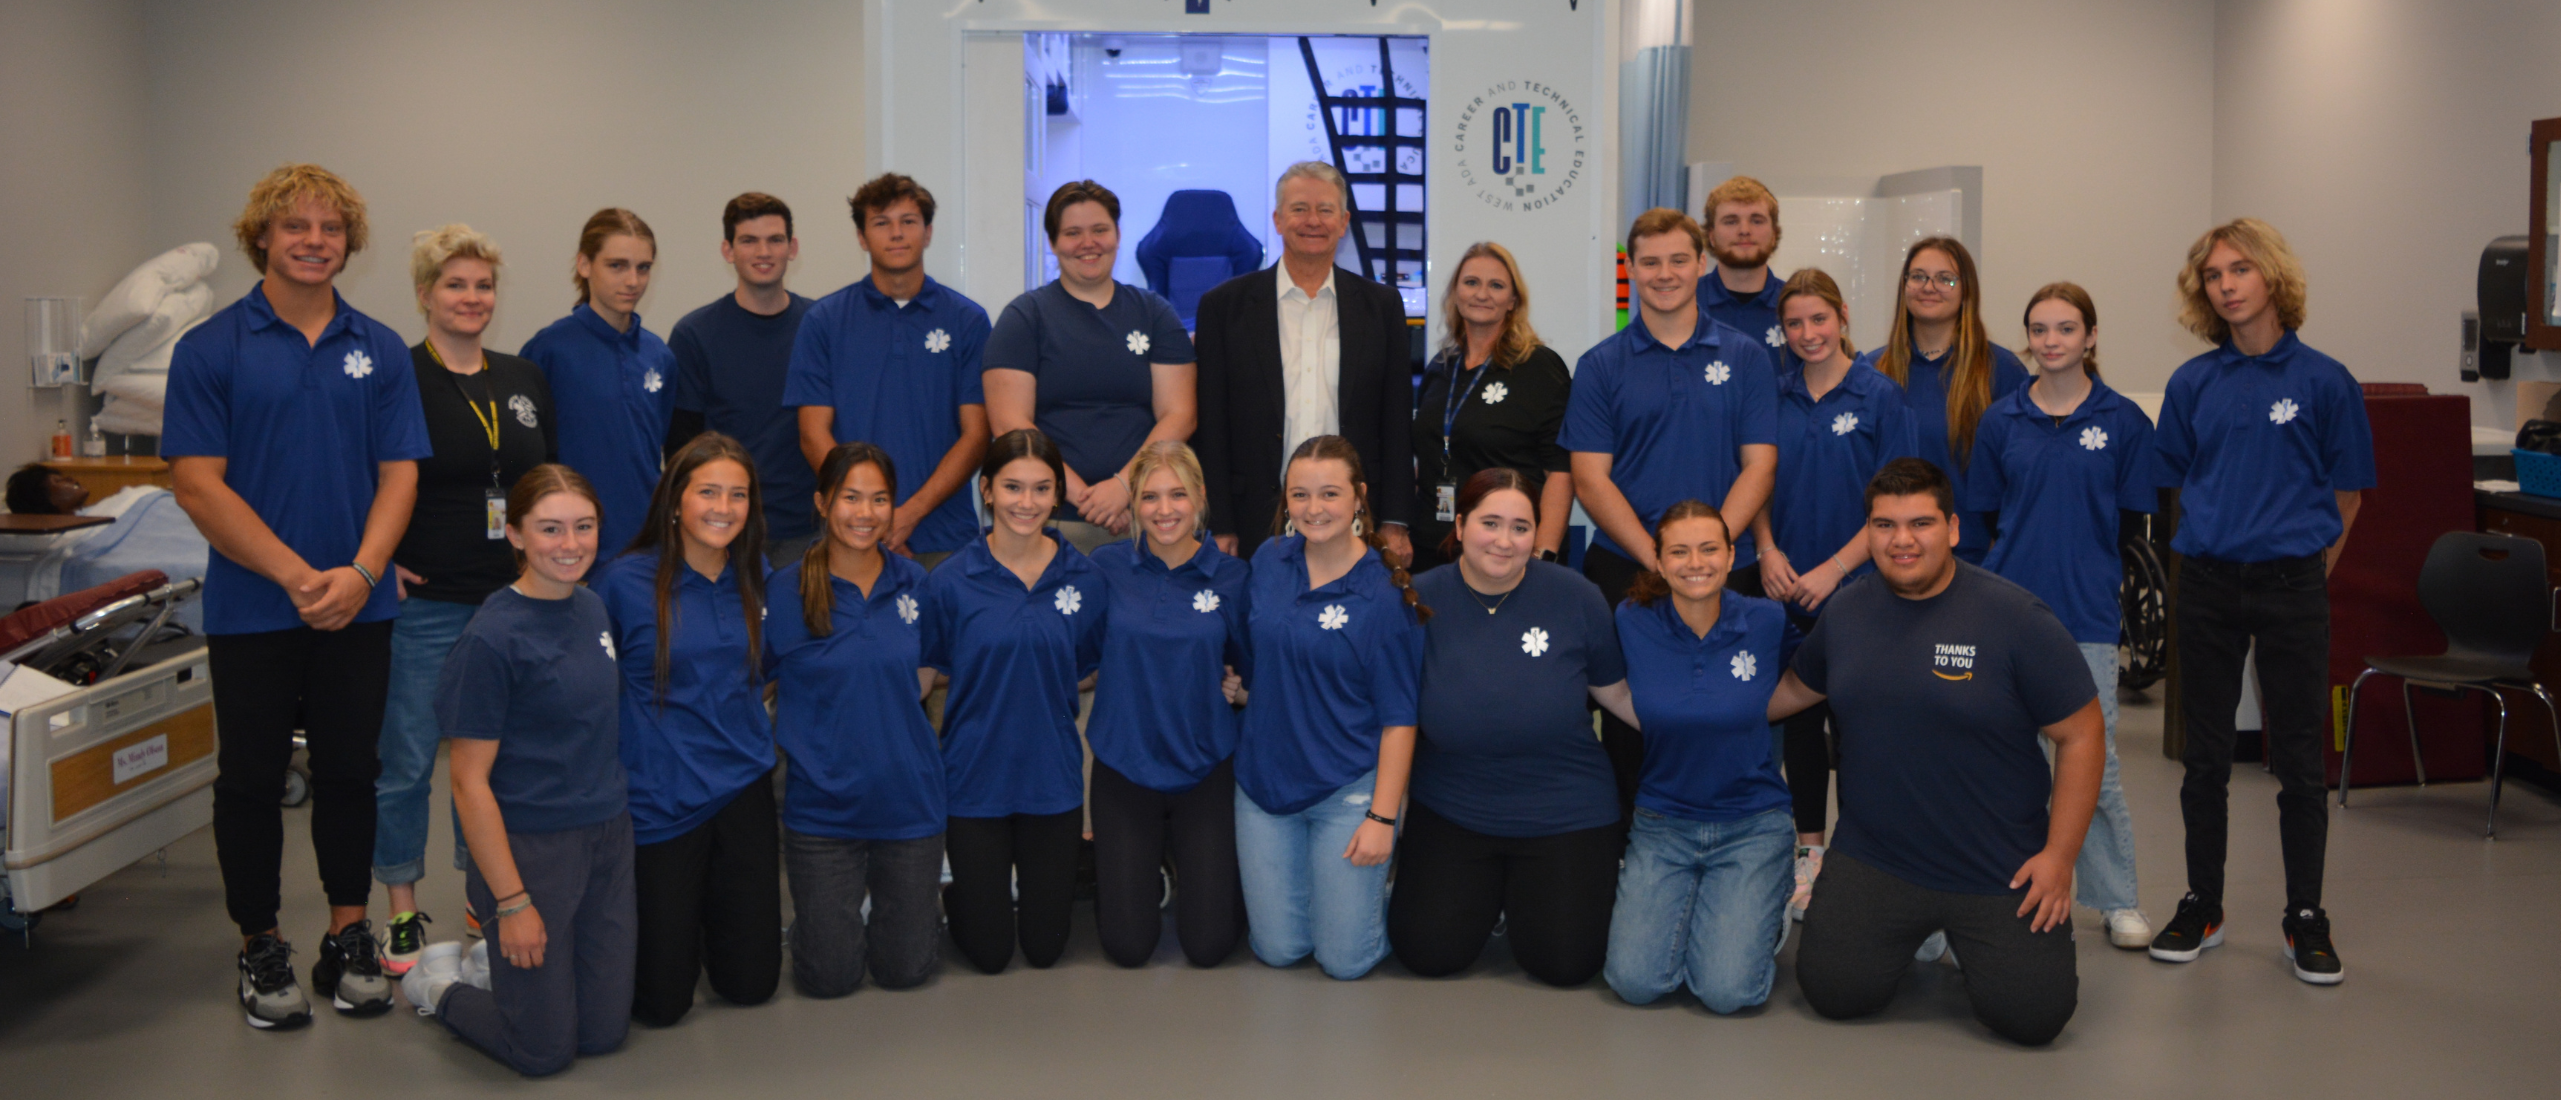 governor little with CTE emt class